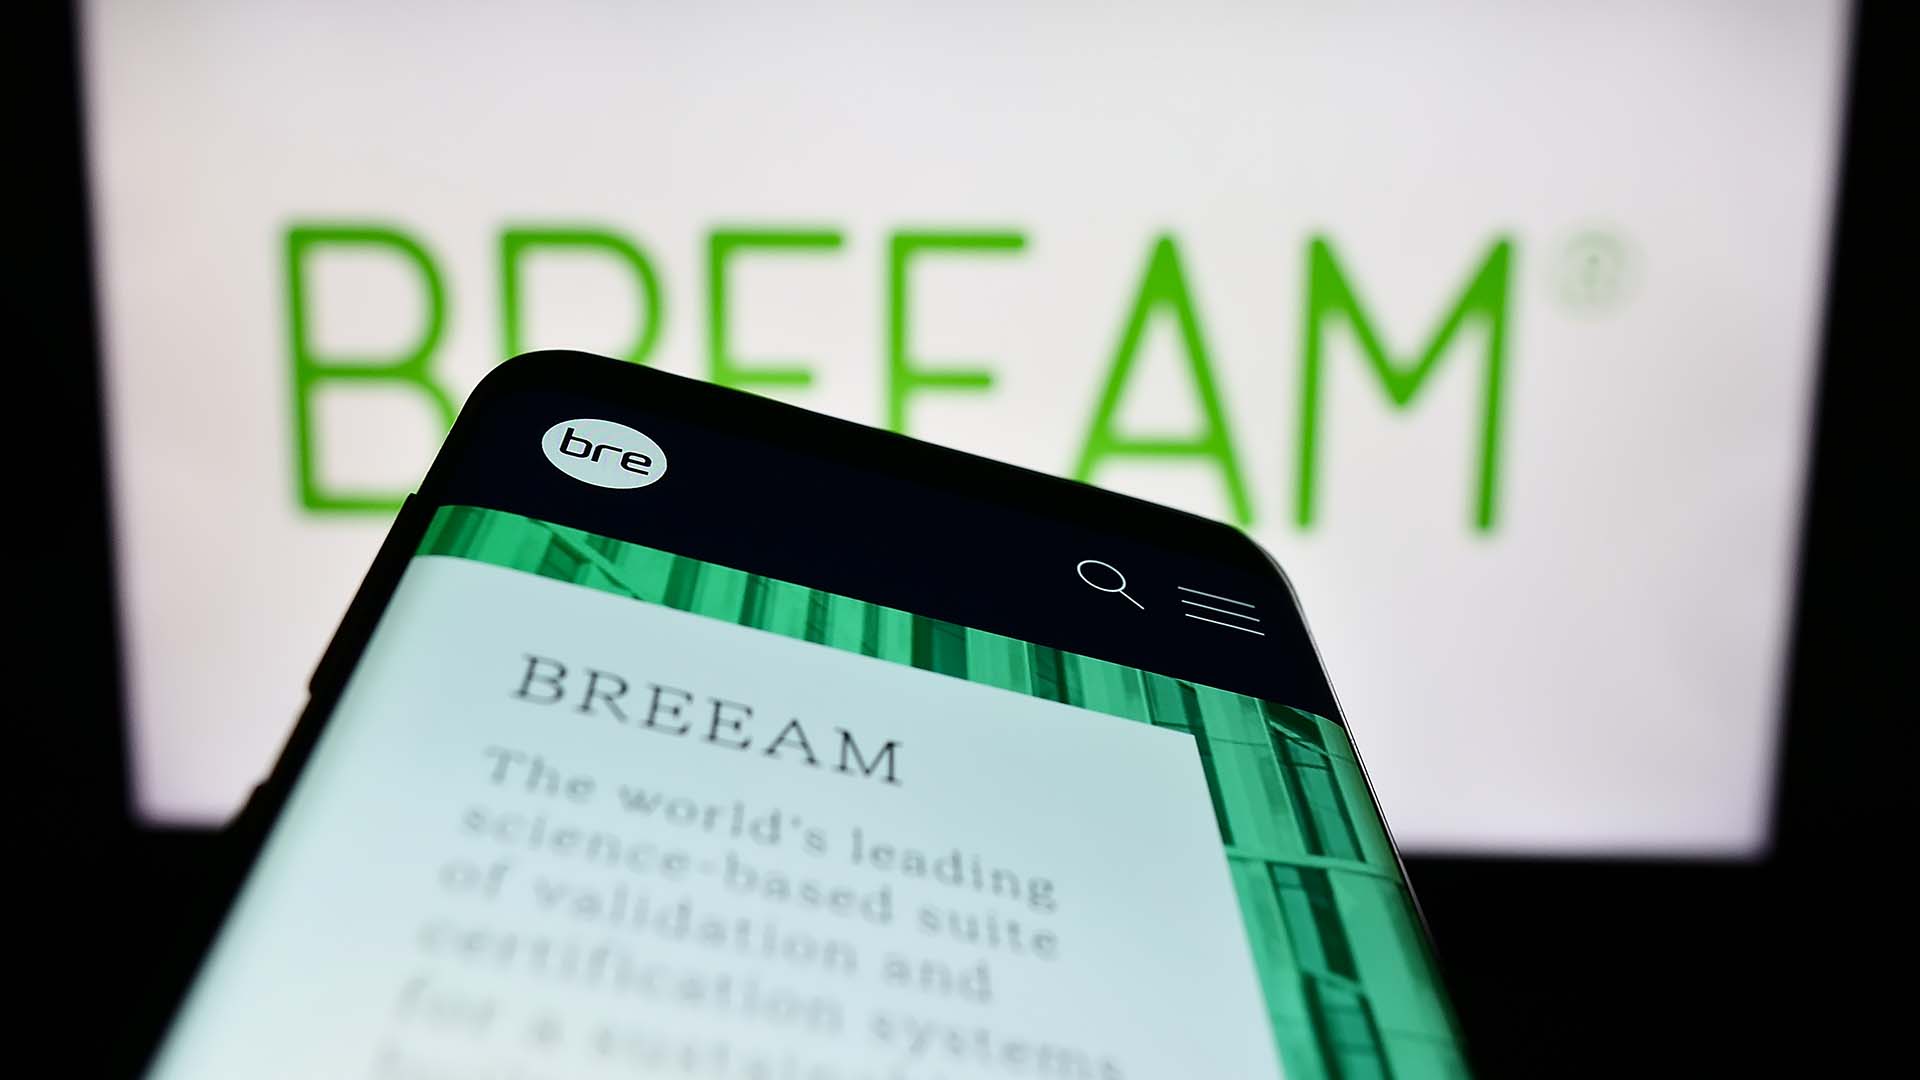 What is BREEAM? This picture shows a mobile device and screen with the word BREEAM in green